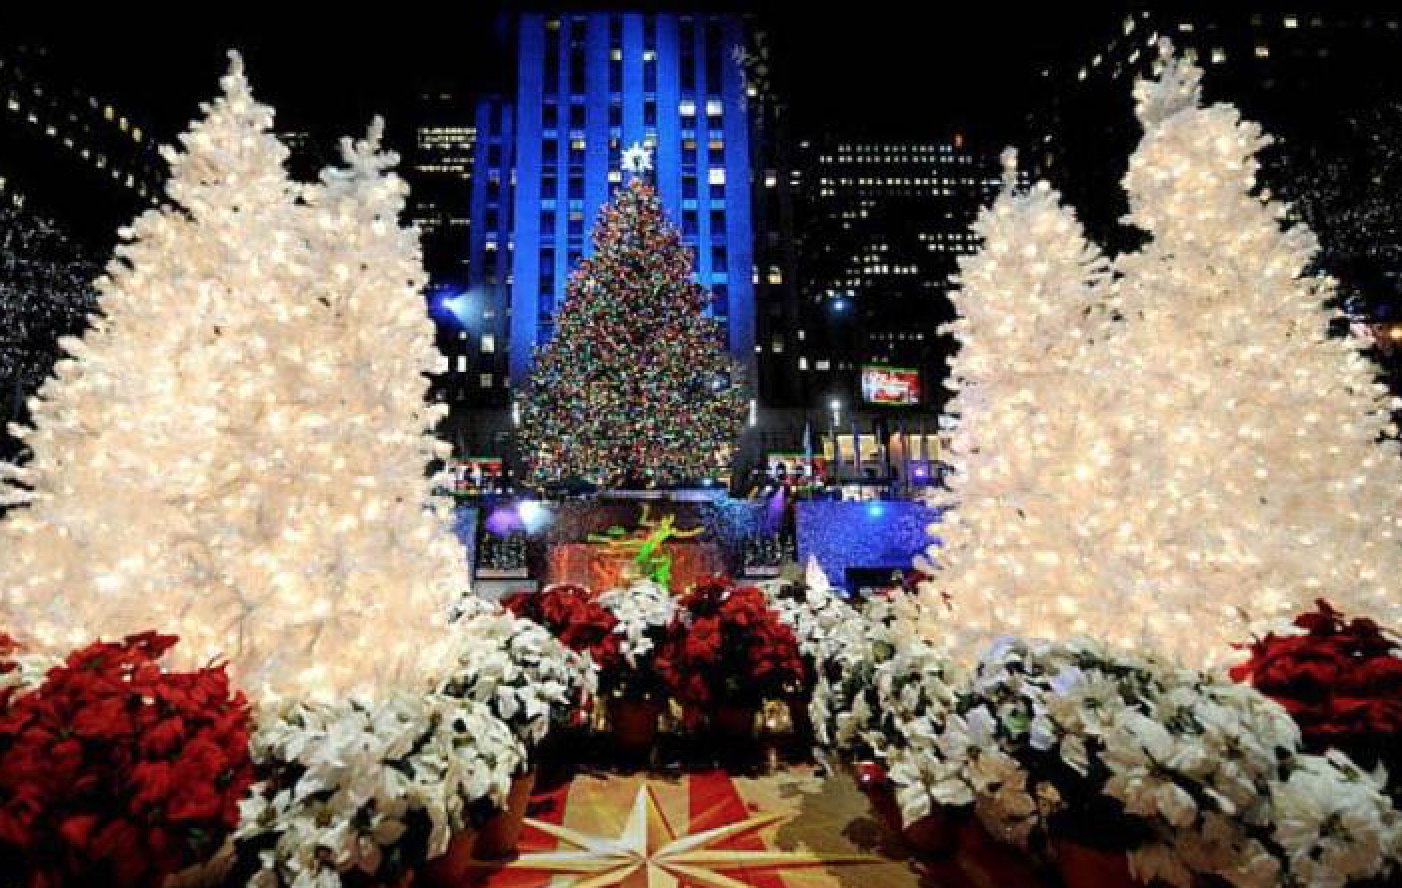 How to Spend Christmas in New York